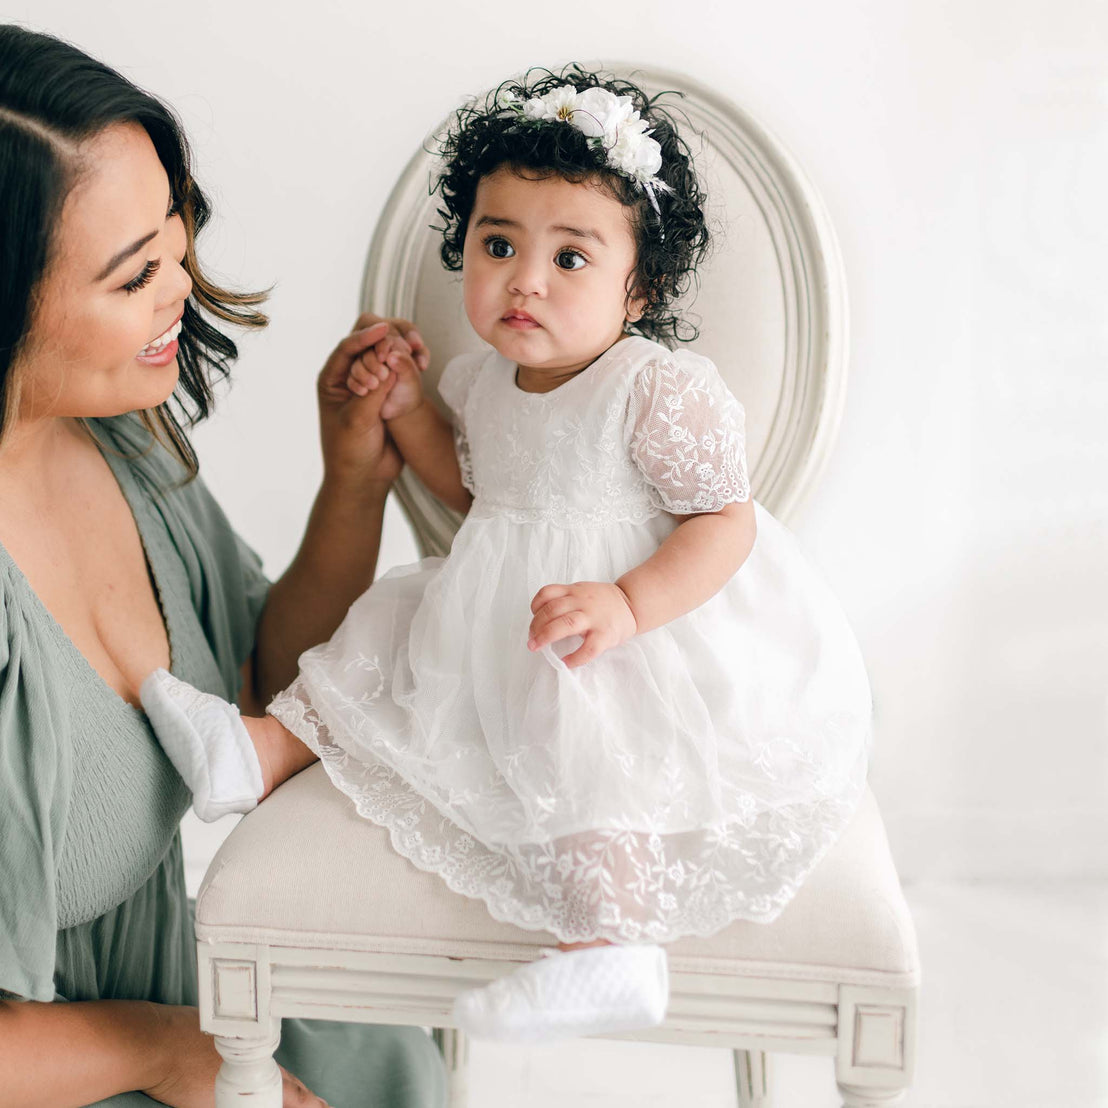 A woman smiles at a baby in an Ella Romper Dress sitting on an elegant chair. The baby wears a floral headband and looks curiously towards the camera. 